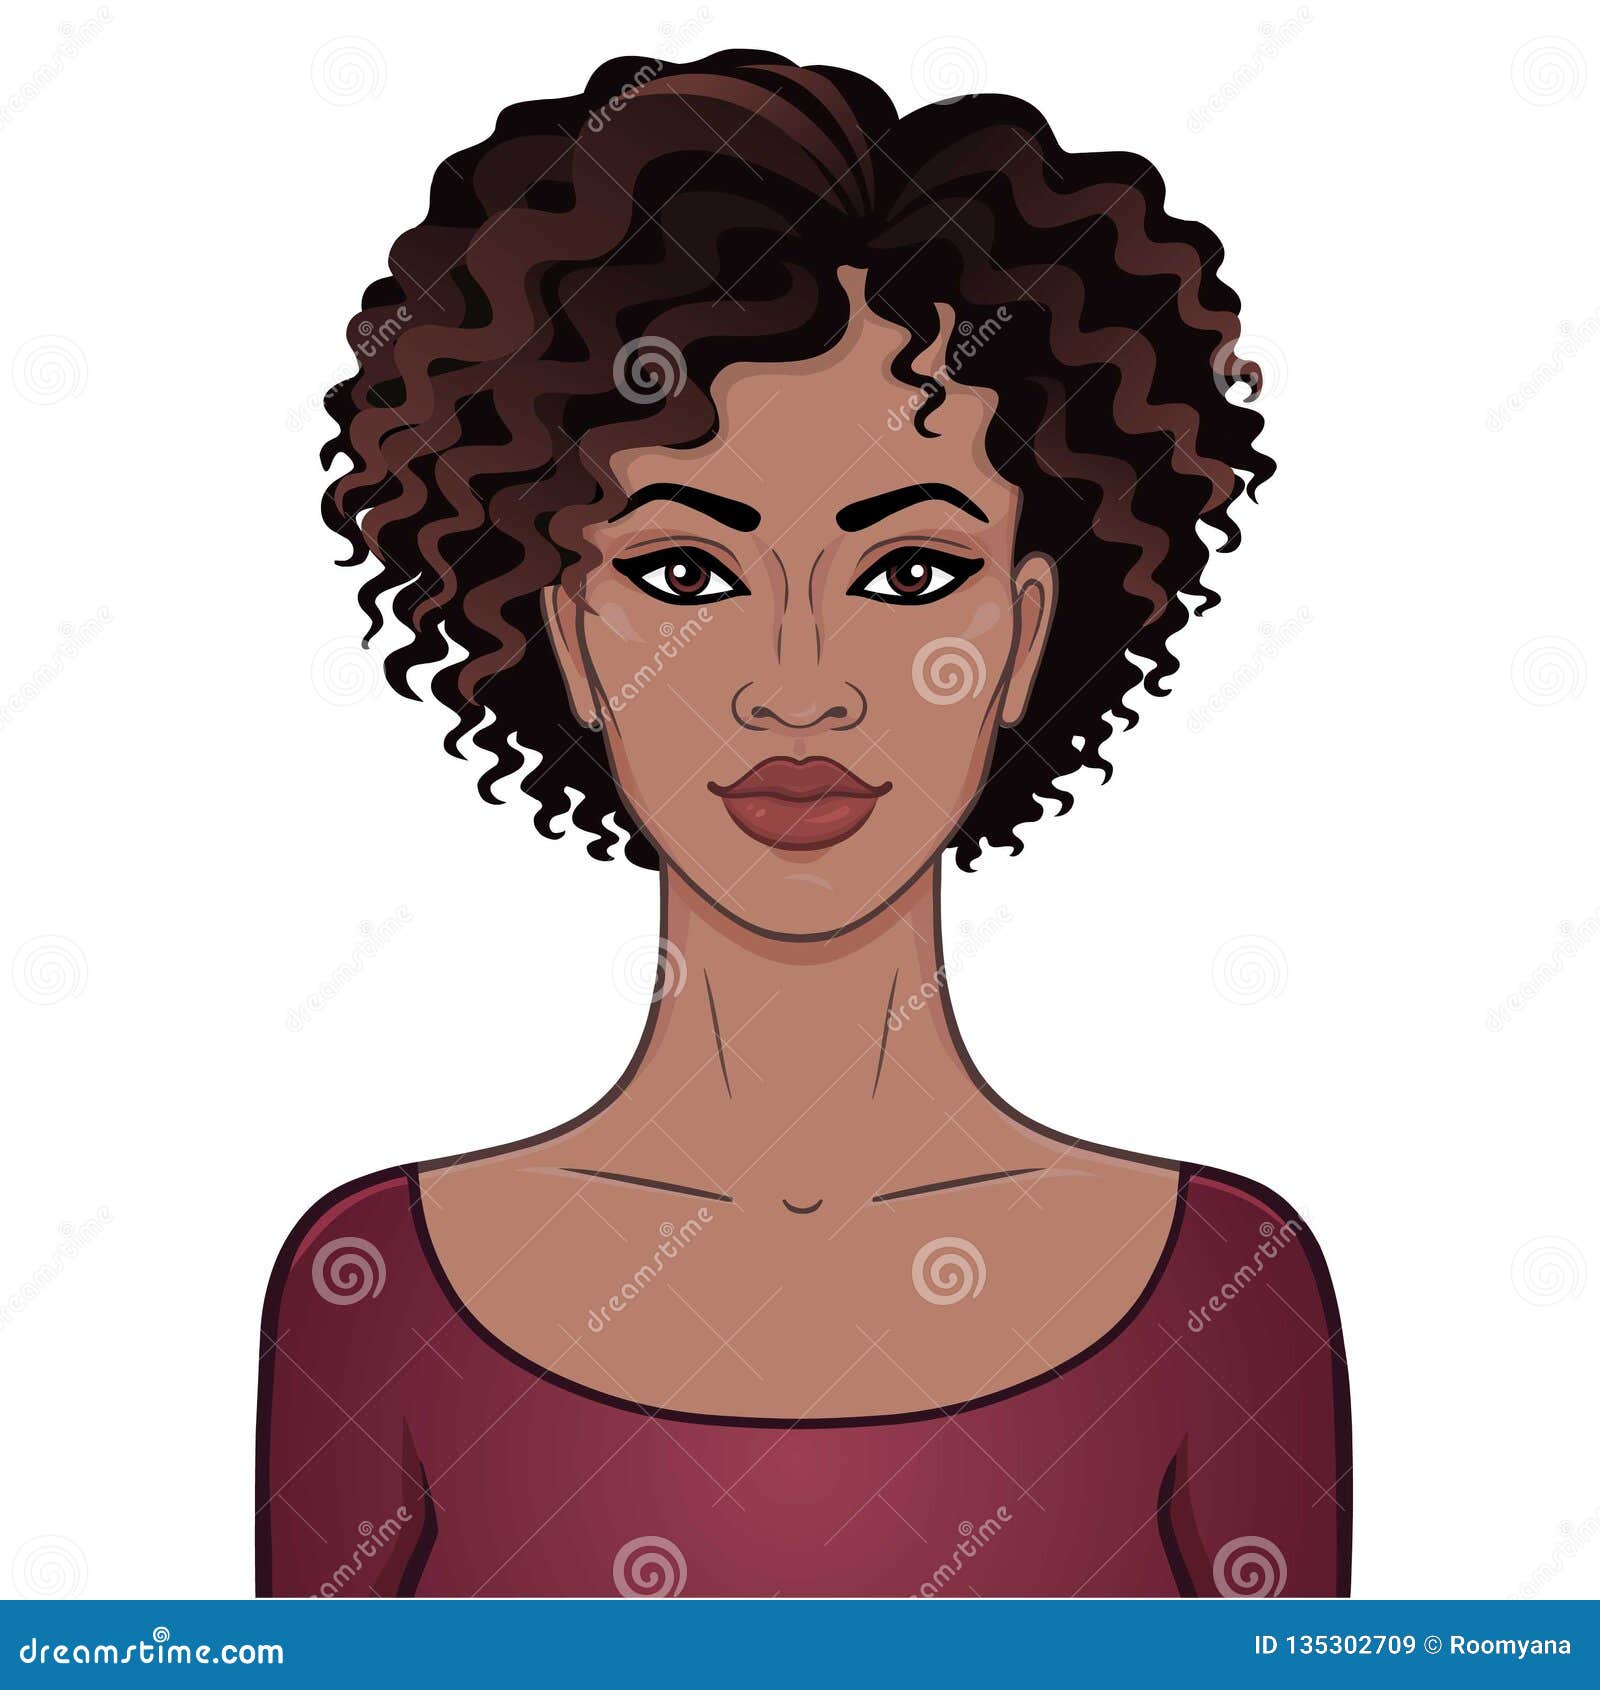 African Beauty. Animation Portrait of the Young Beautiful Black Woman with  Curly Hair Stock Vector - Illustration of african, appearance: 135302709